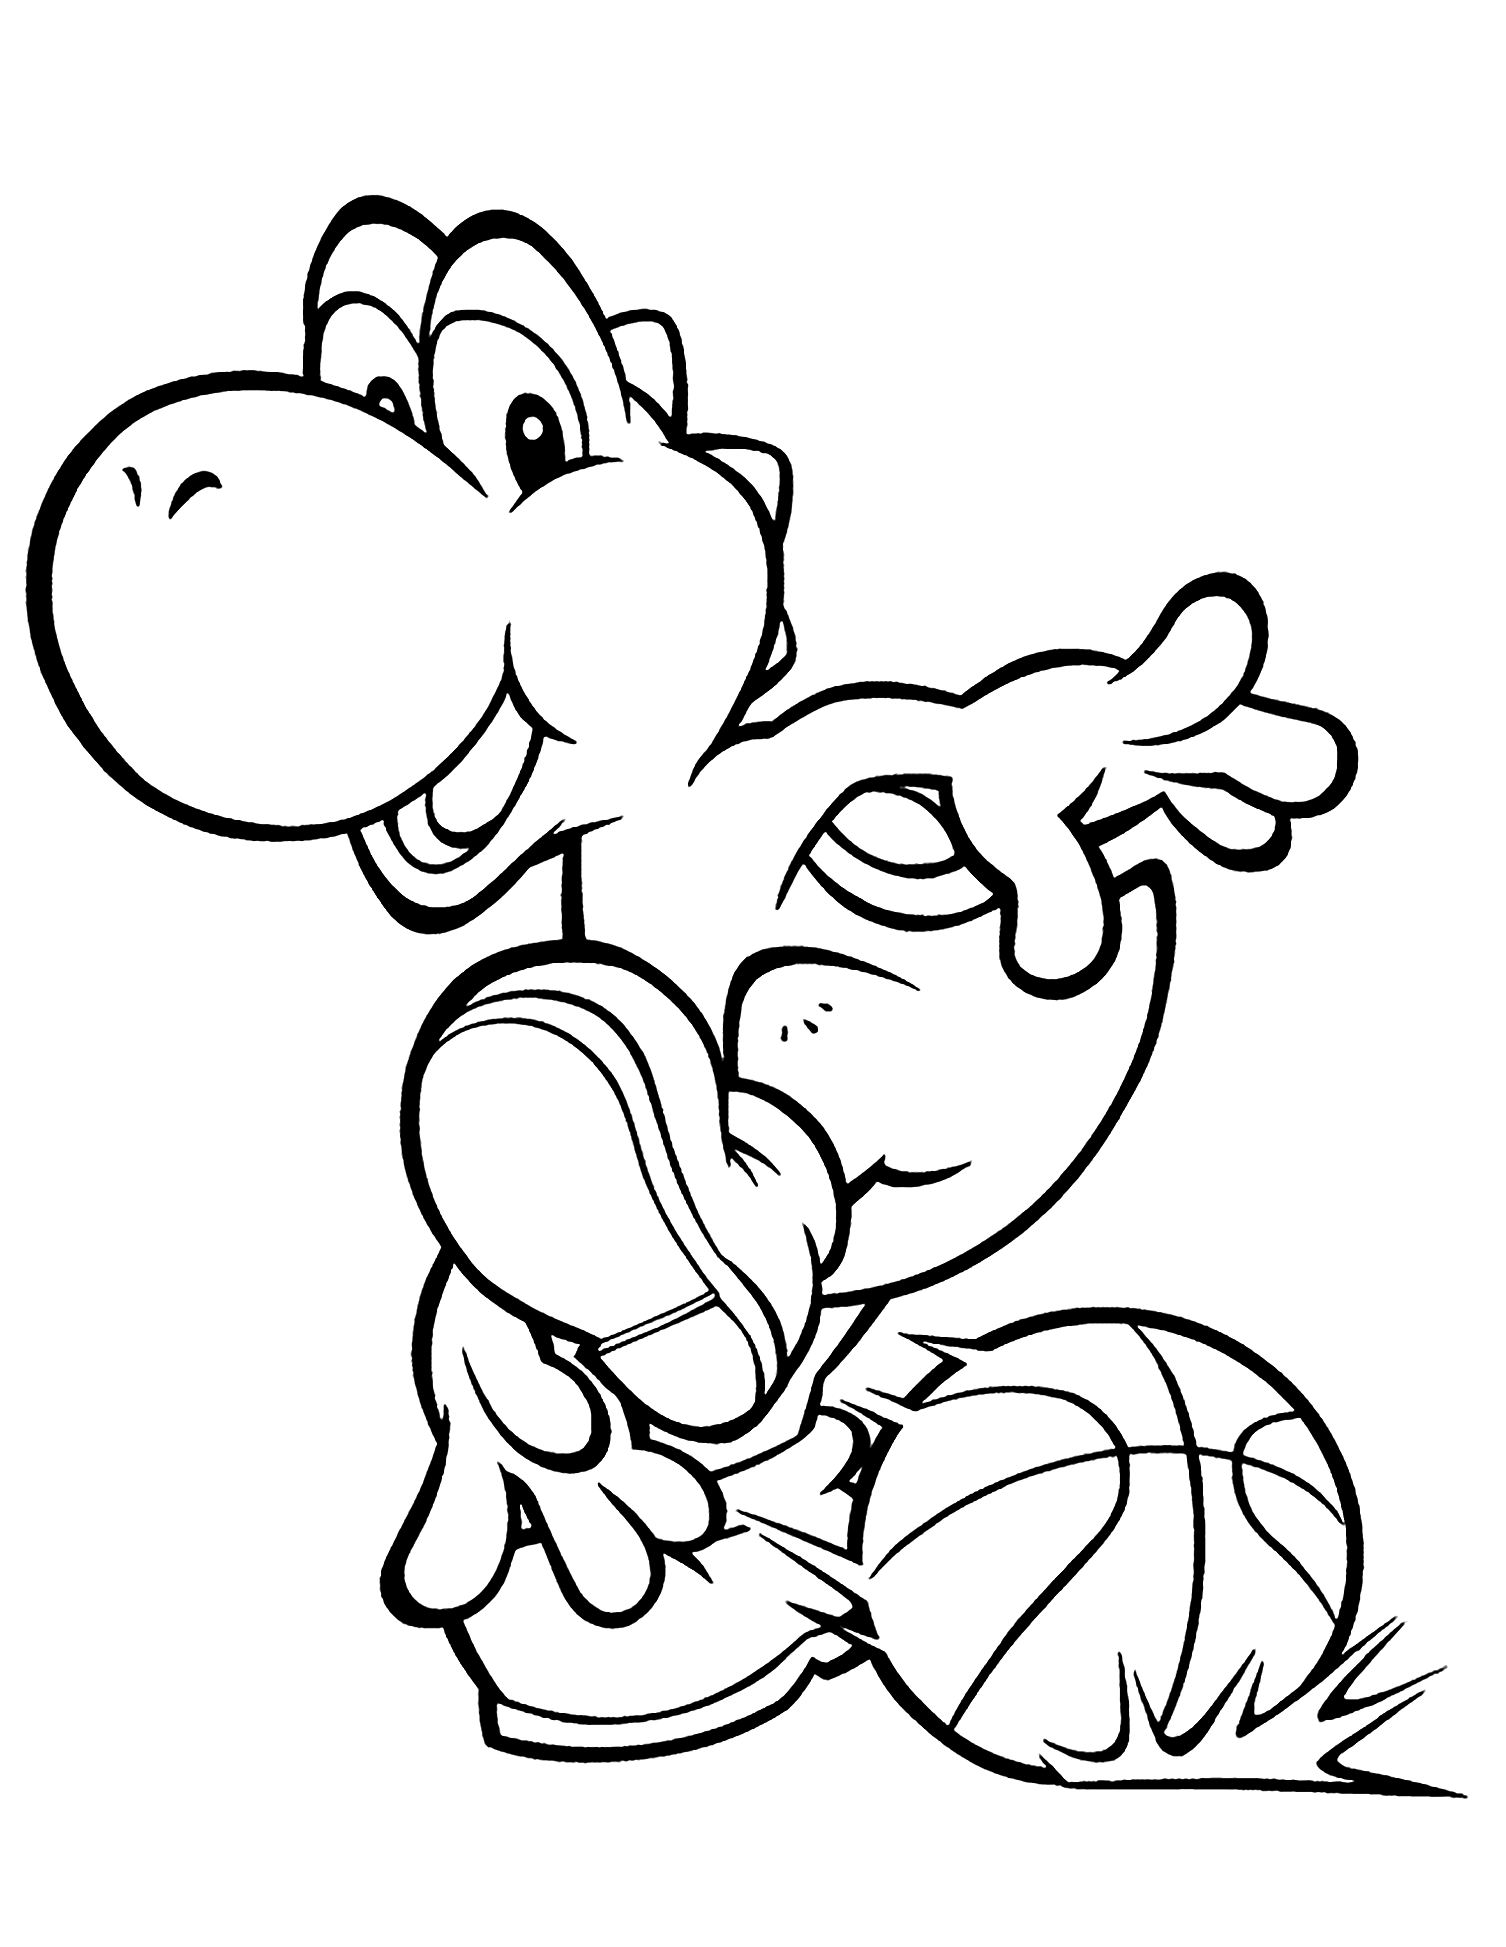 basketball-coloring-pages-for-kids-basketball-kids-coloring-pages